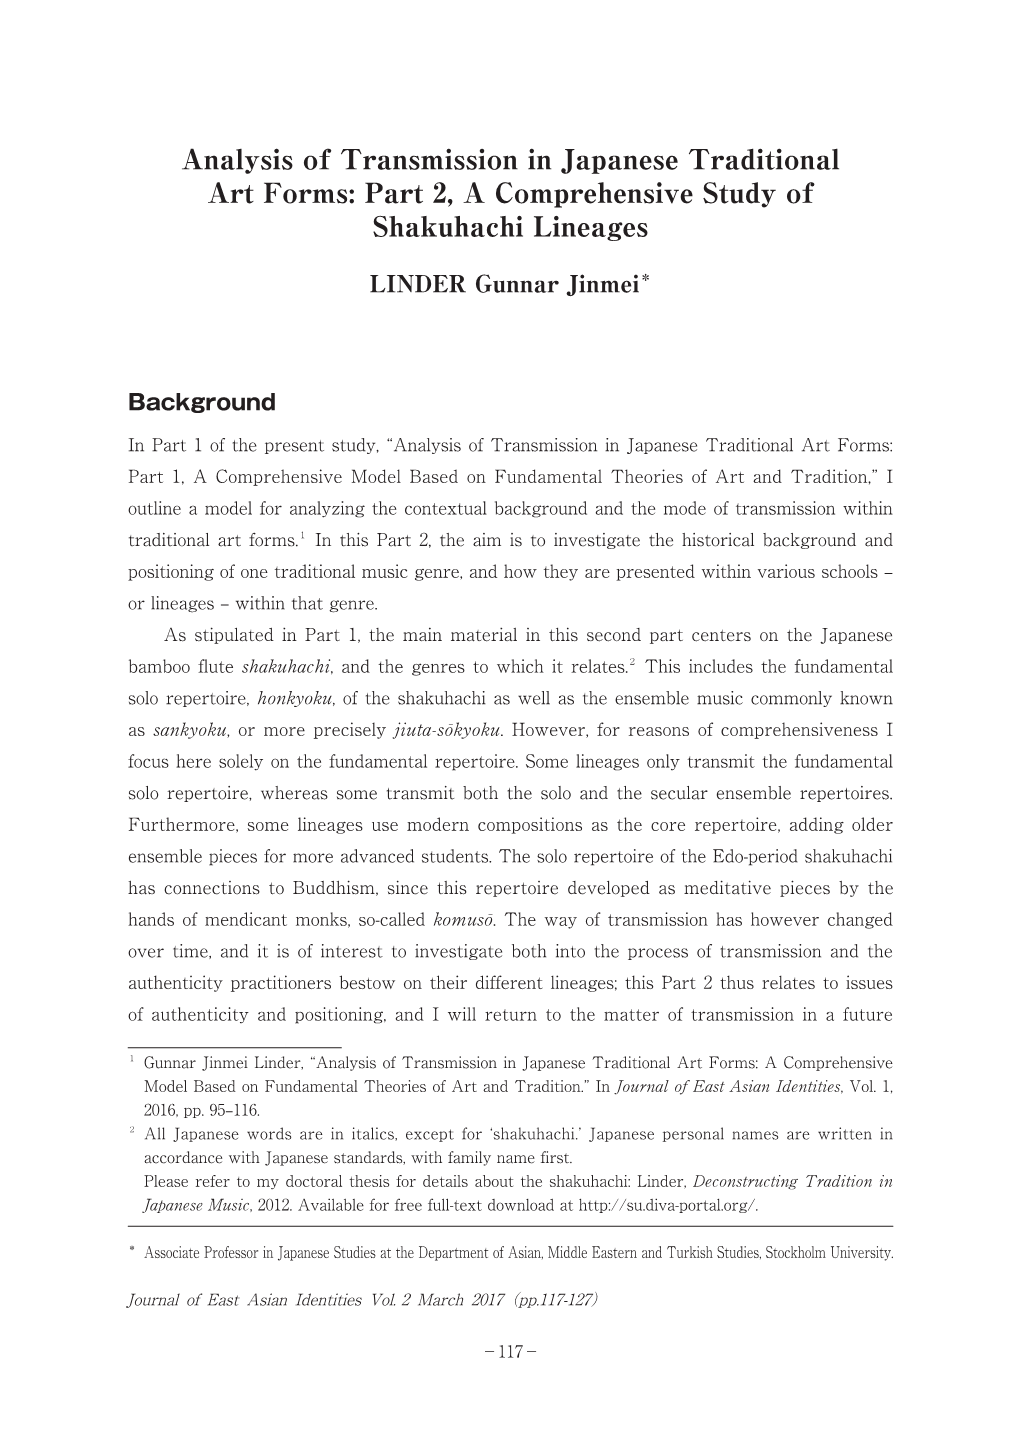 Analysis of Transmission in Japanese Traditional Art Forms: Part 2, a Comprehensive Study of Shakuhachi Lineages